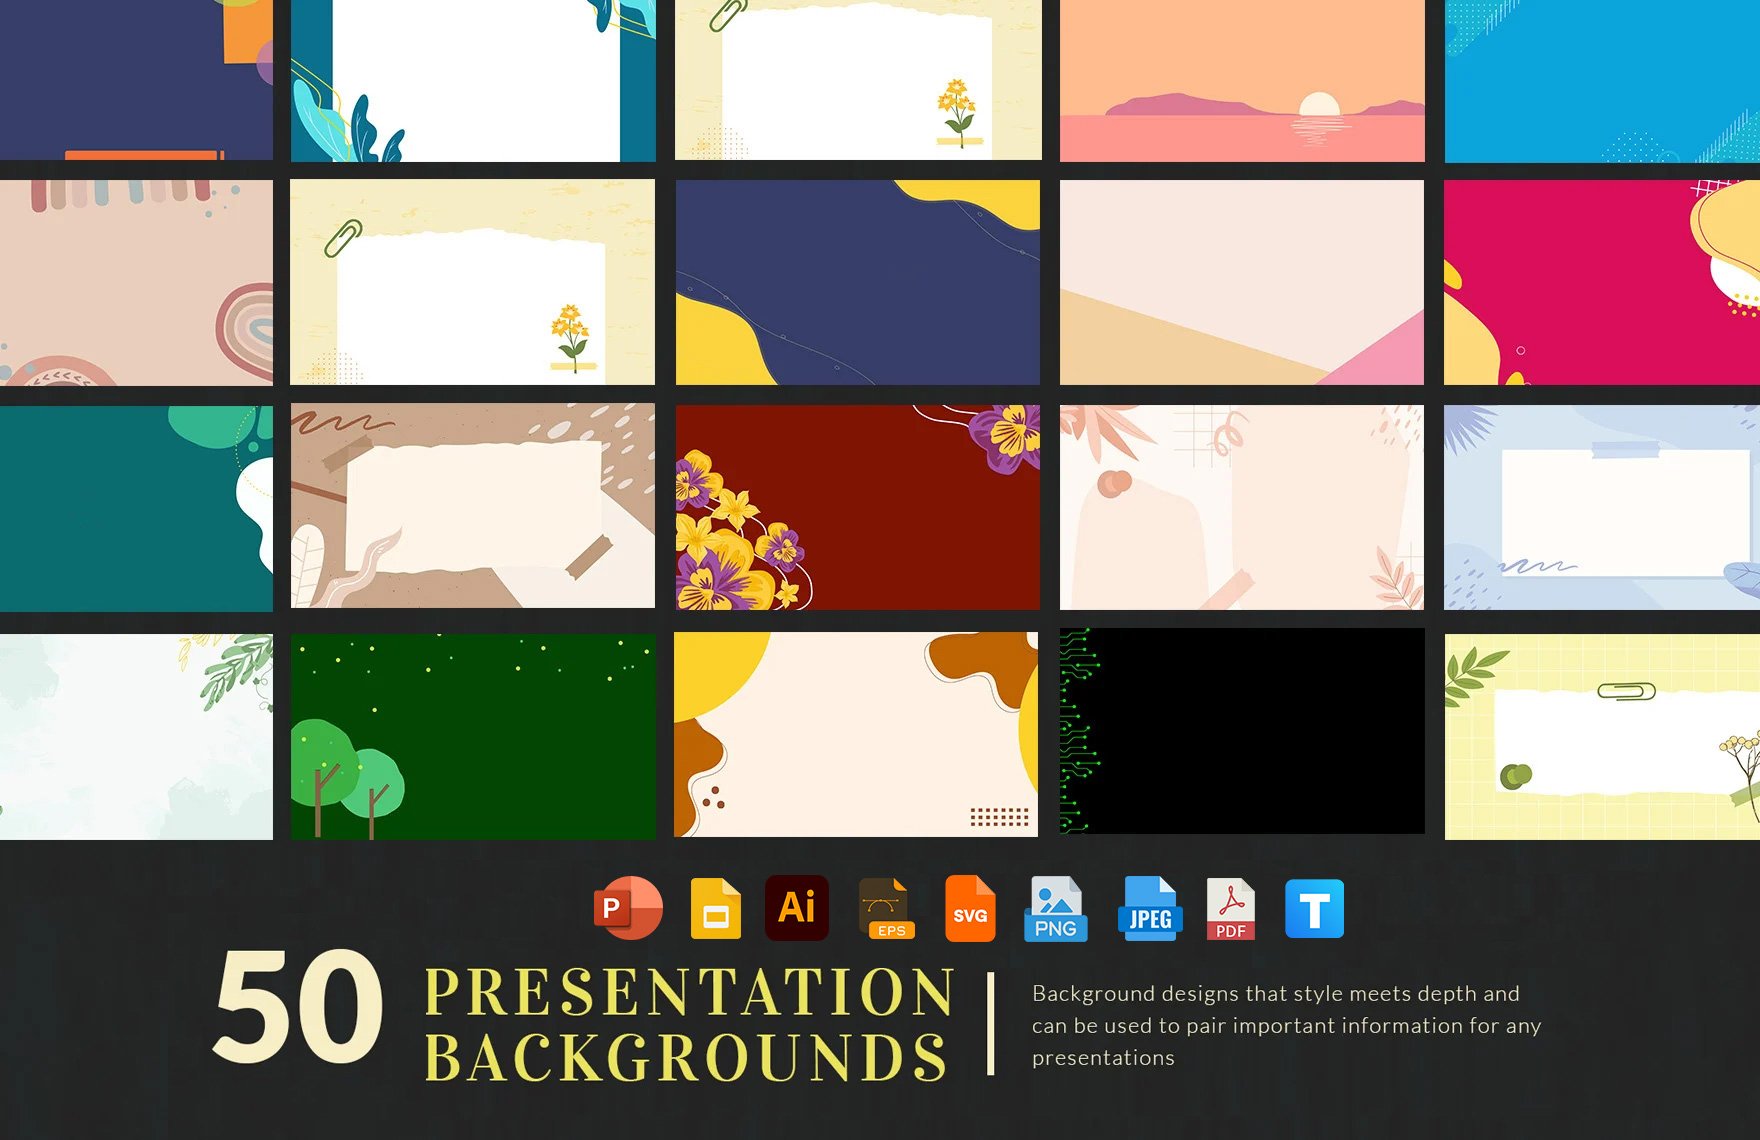 Free Backgrounds Template